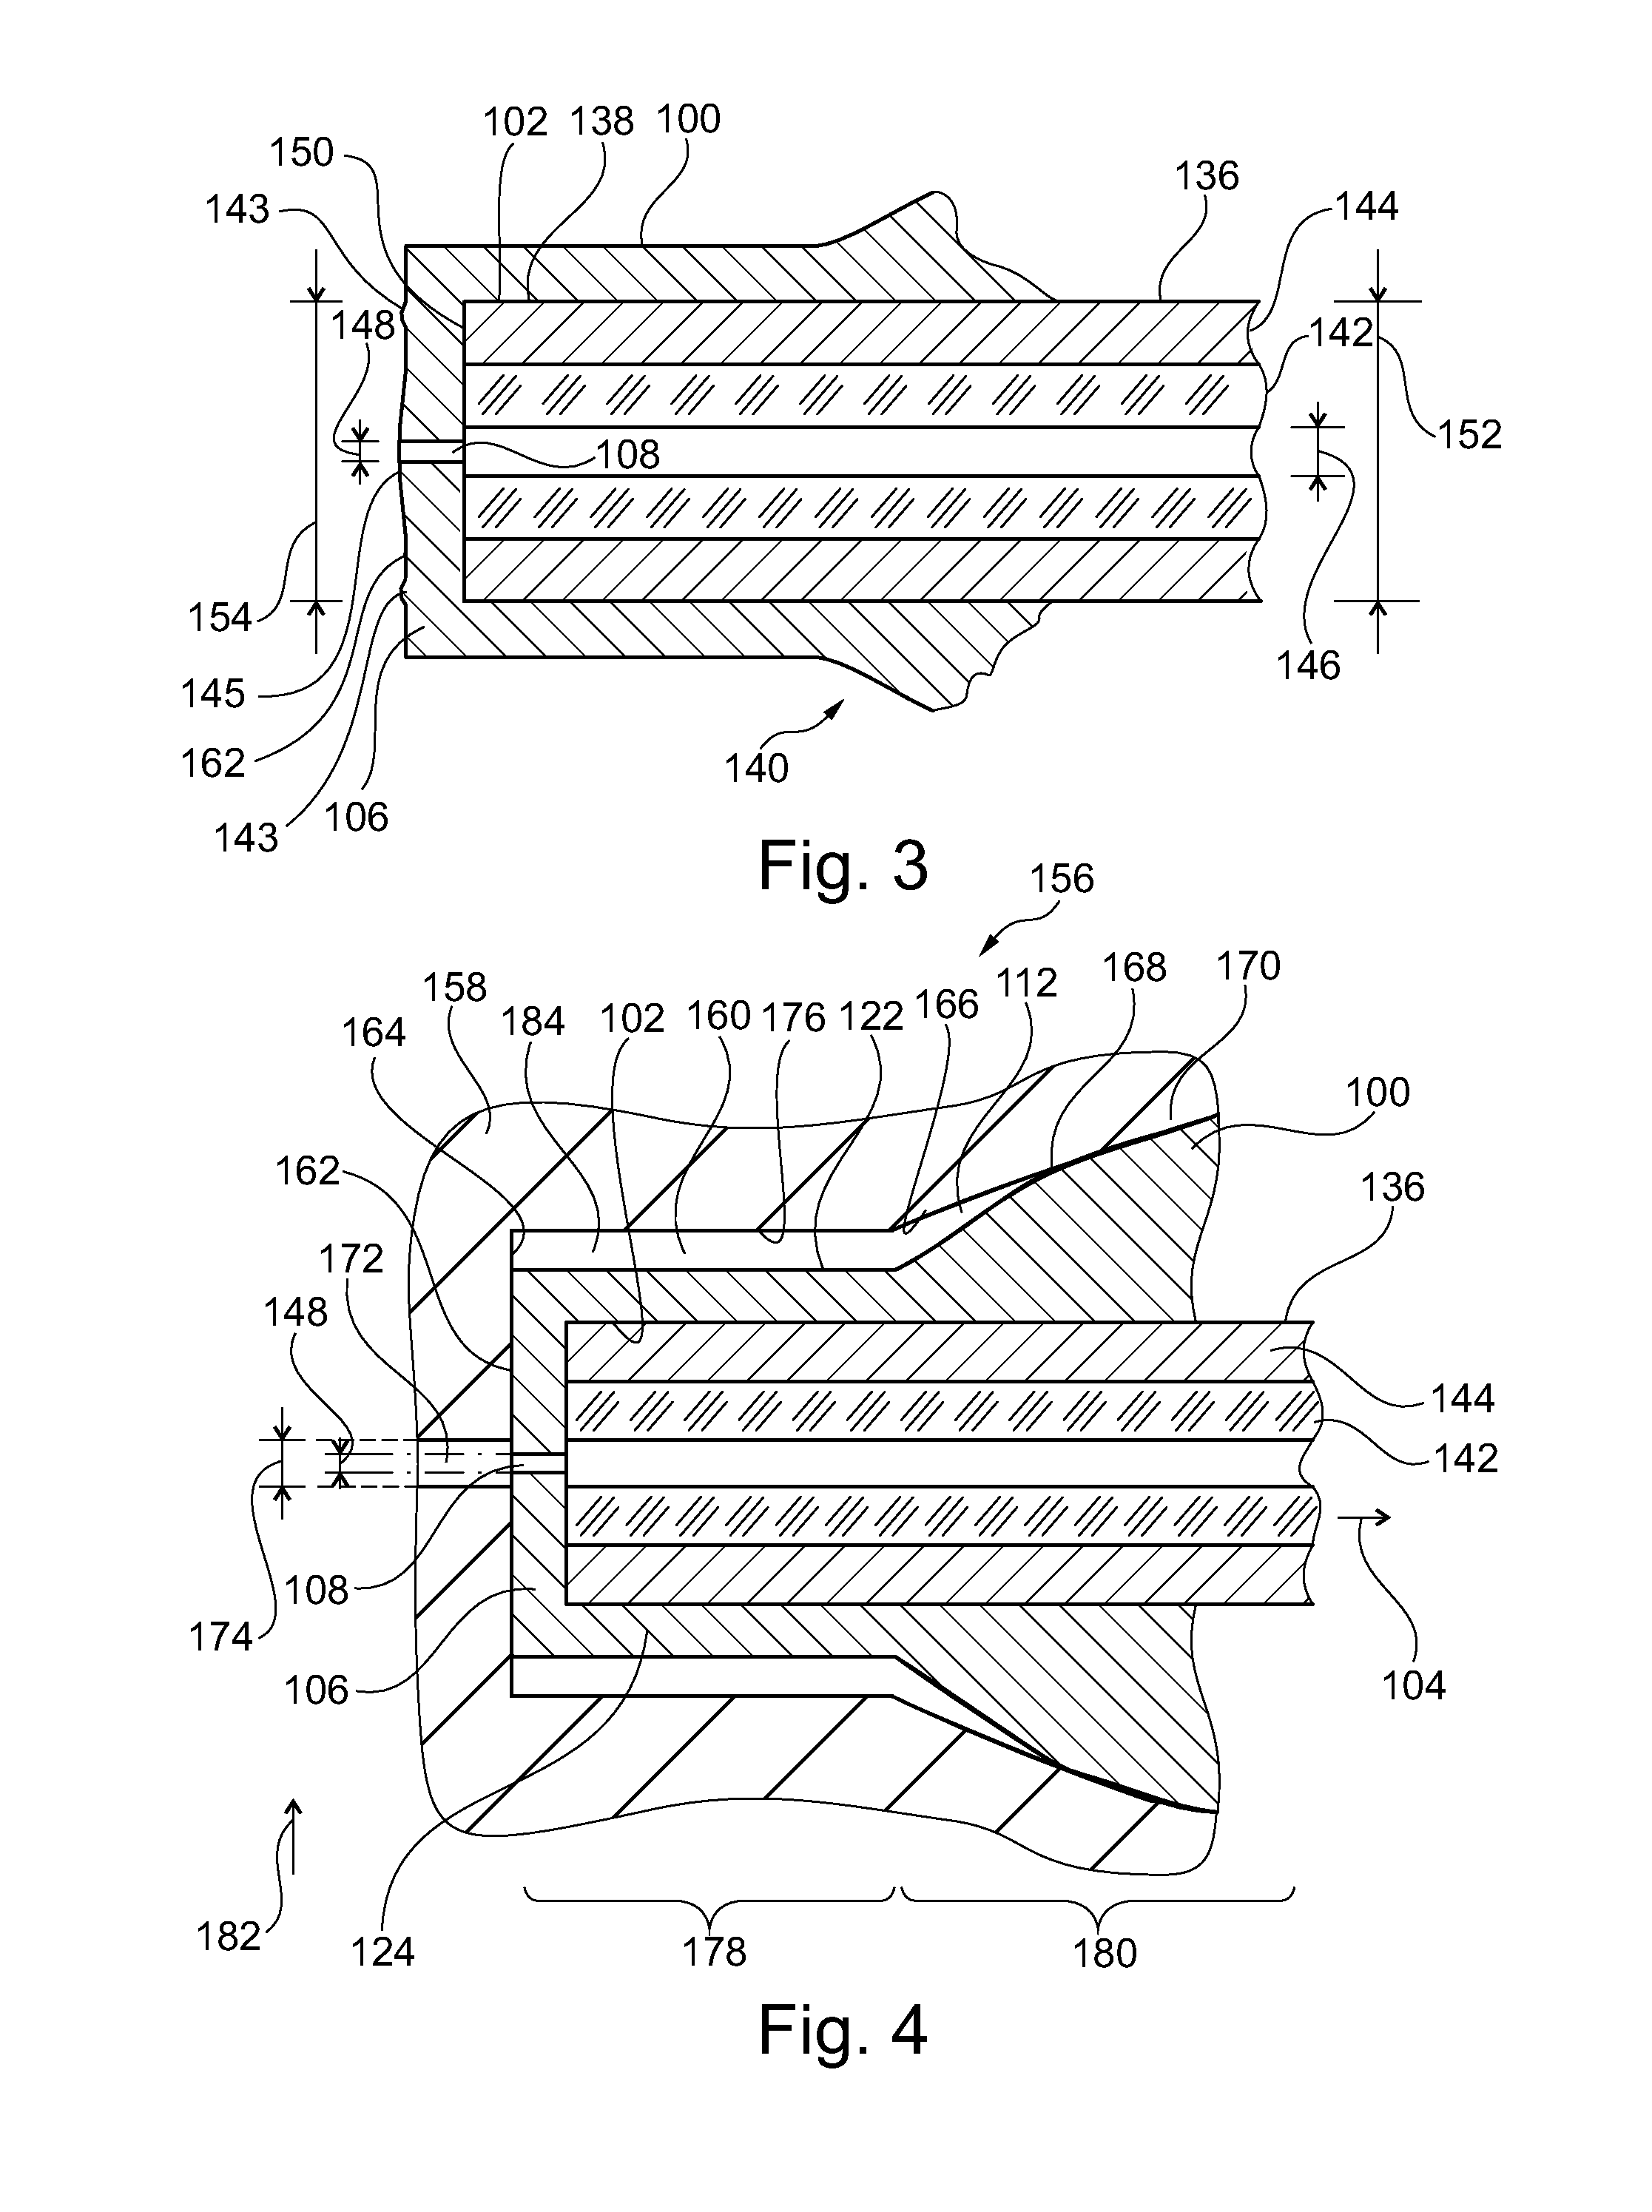 Sealing element for a fluidic connection